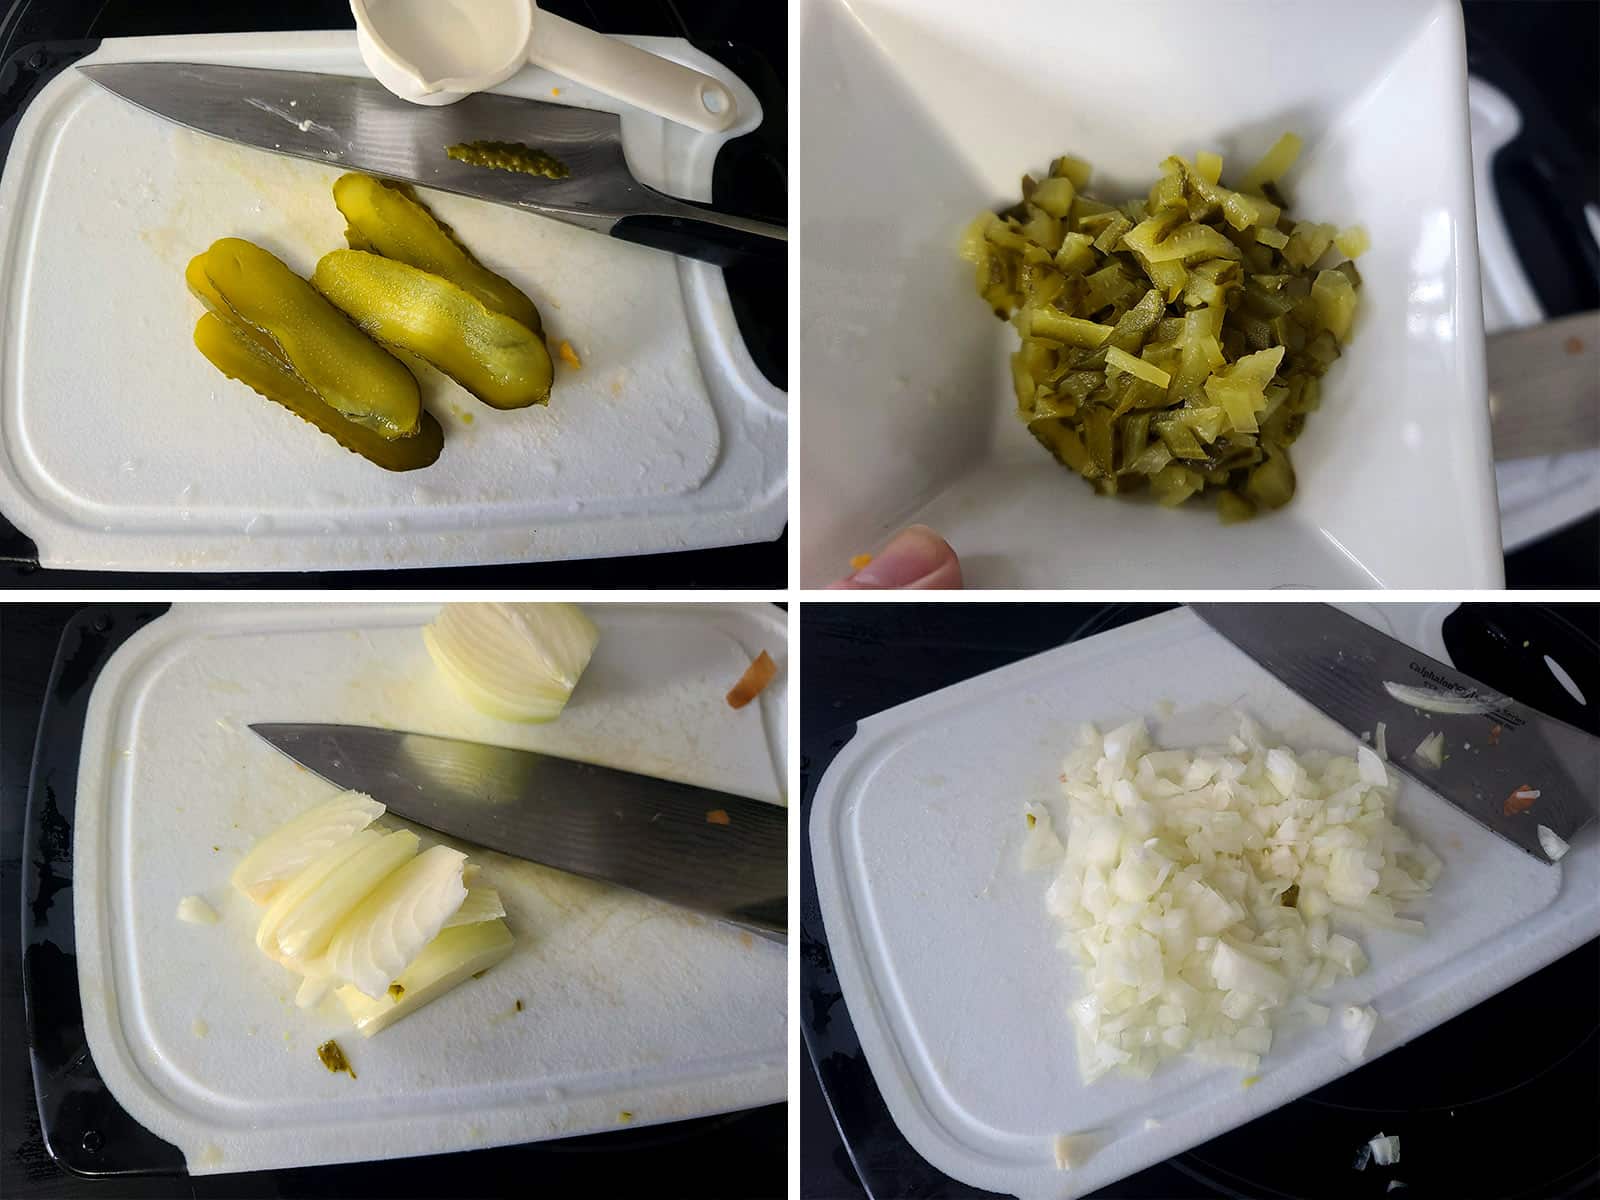 A 2 part image showing the pickles and onion being finely chopped.